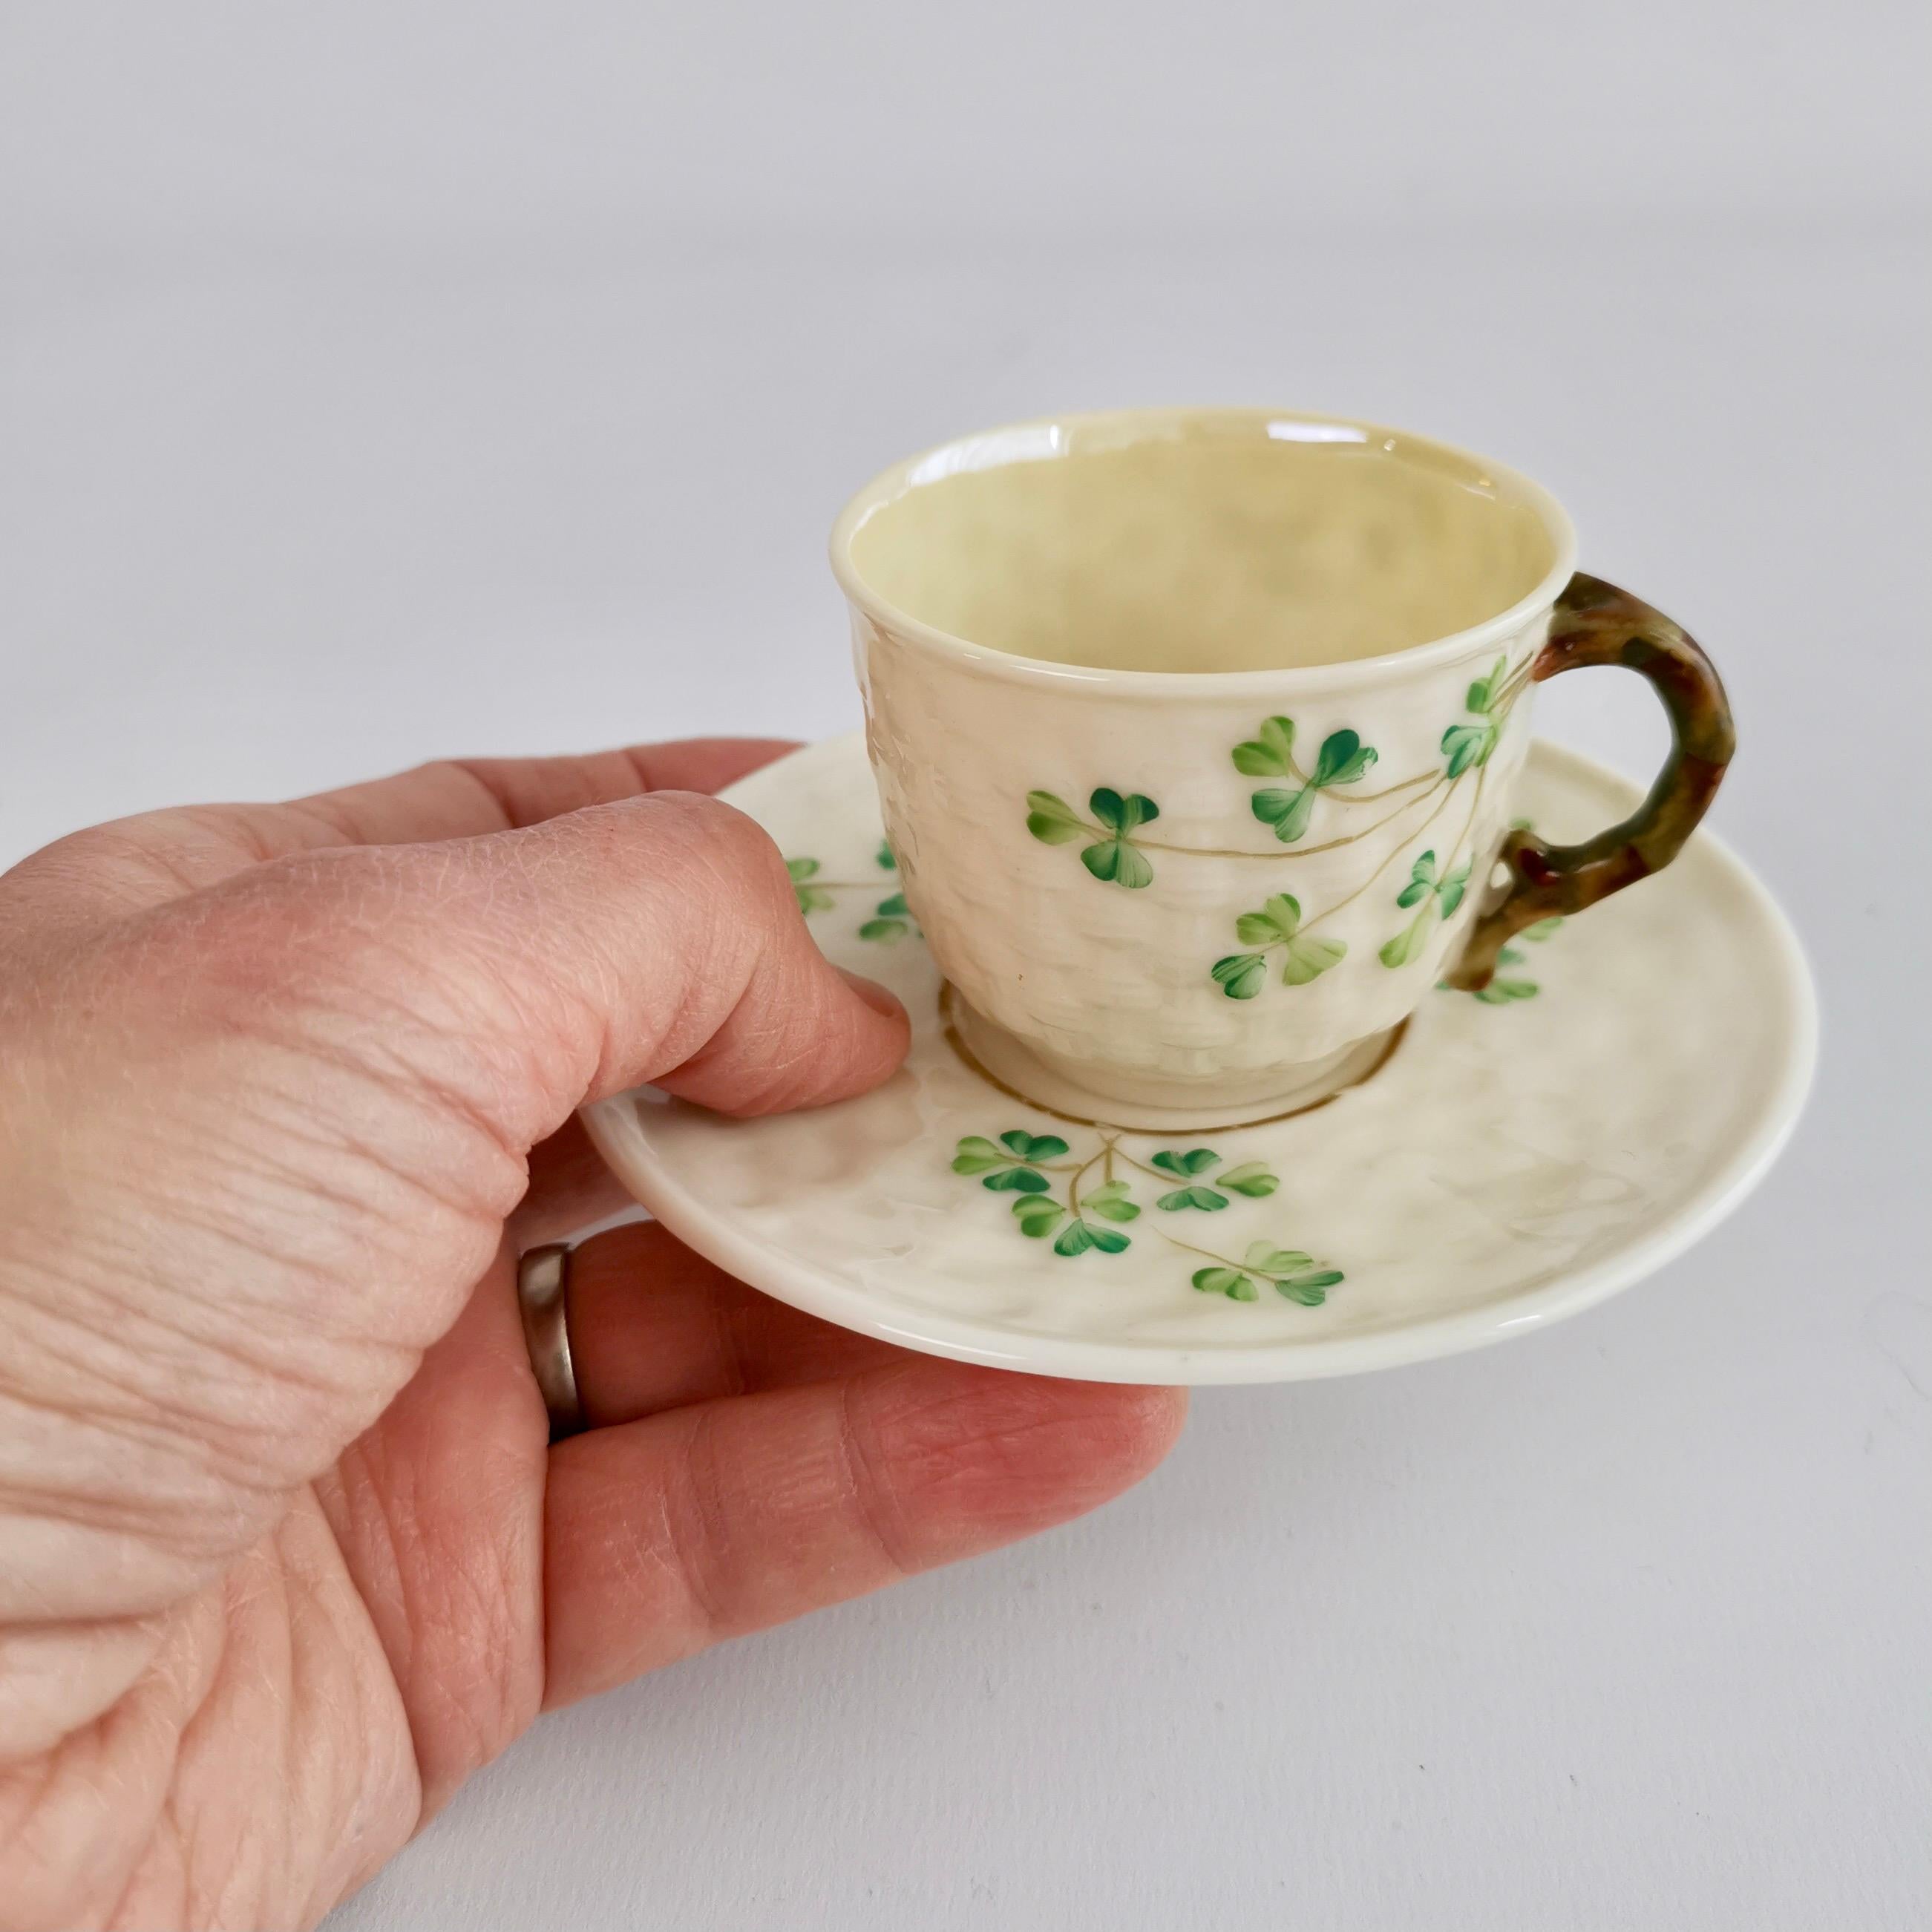 This is a very charming Belleek demitasse cup and saucer in the Shamrock design with the 3rd Black Mark, which was used between 1926 and 1946. 

These demitasse cups are rare so this is a great opportunity - and this would make a wonderful little